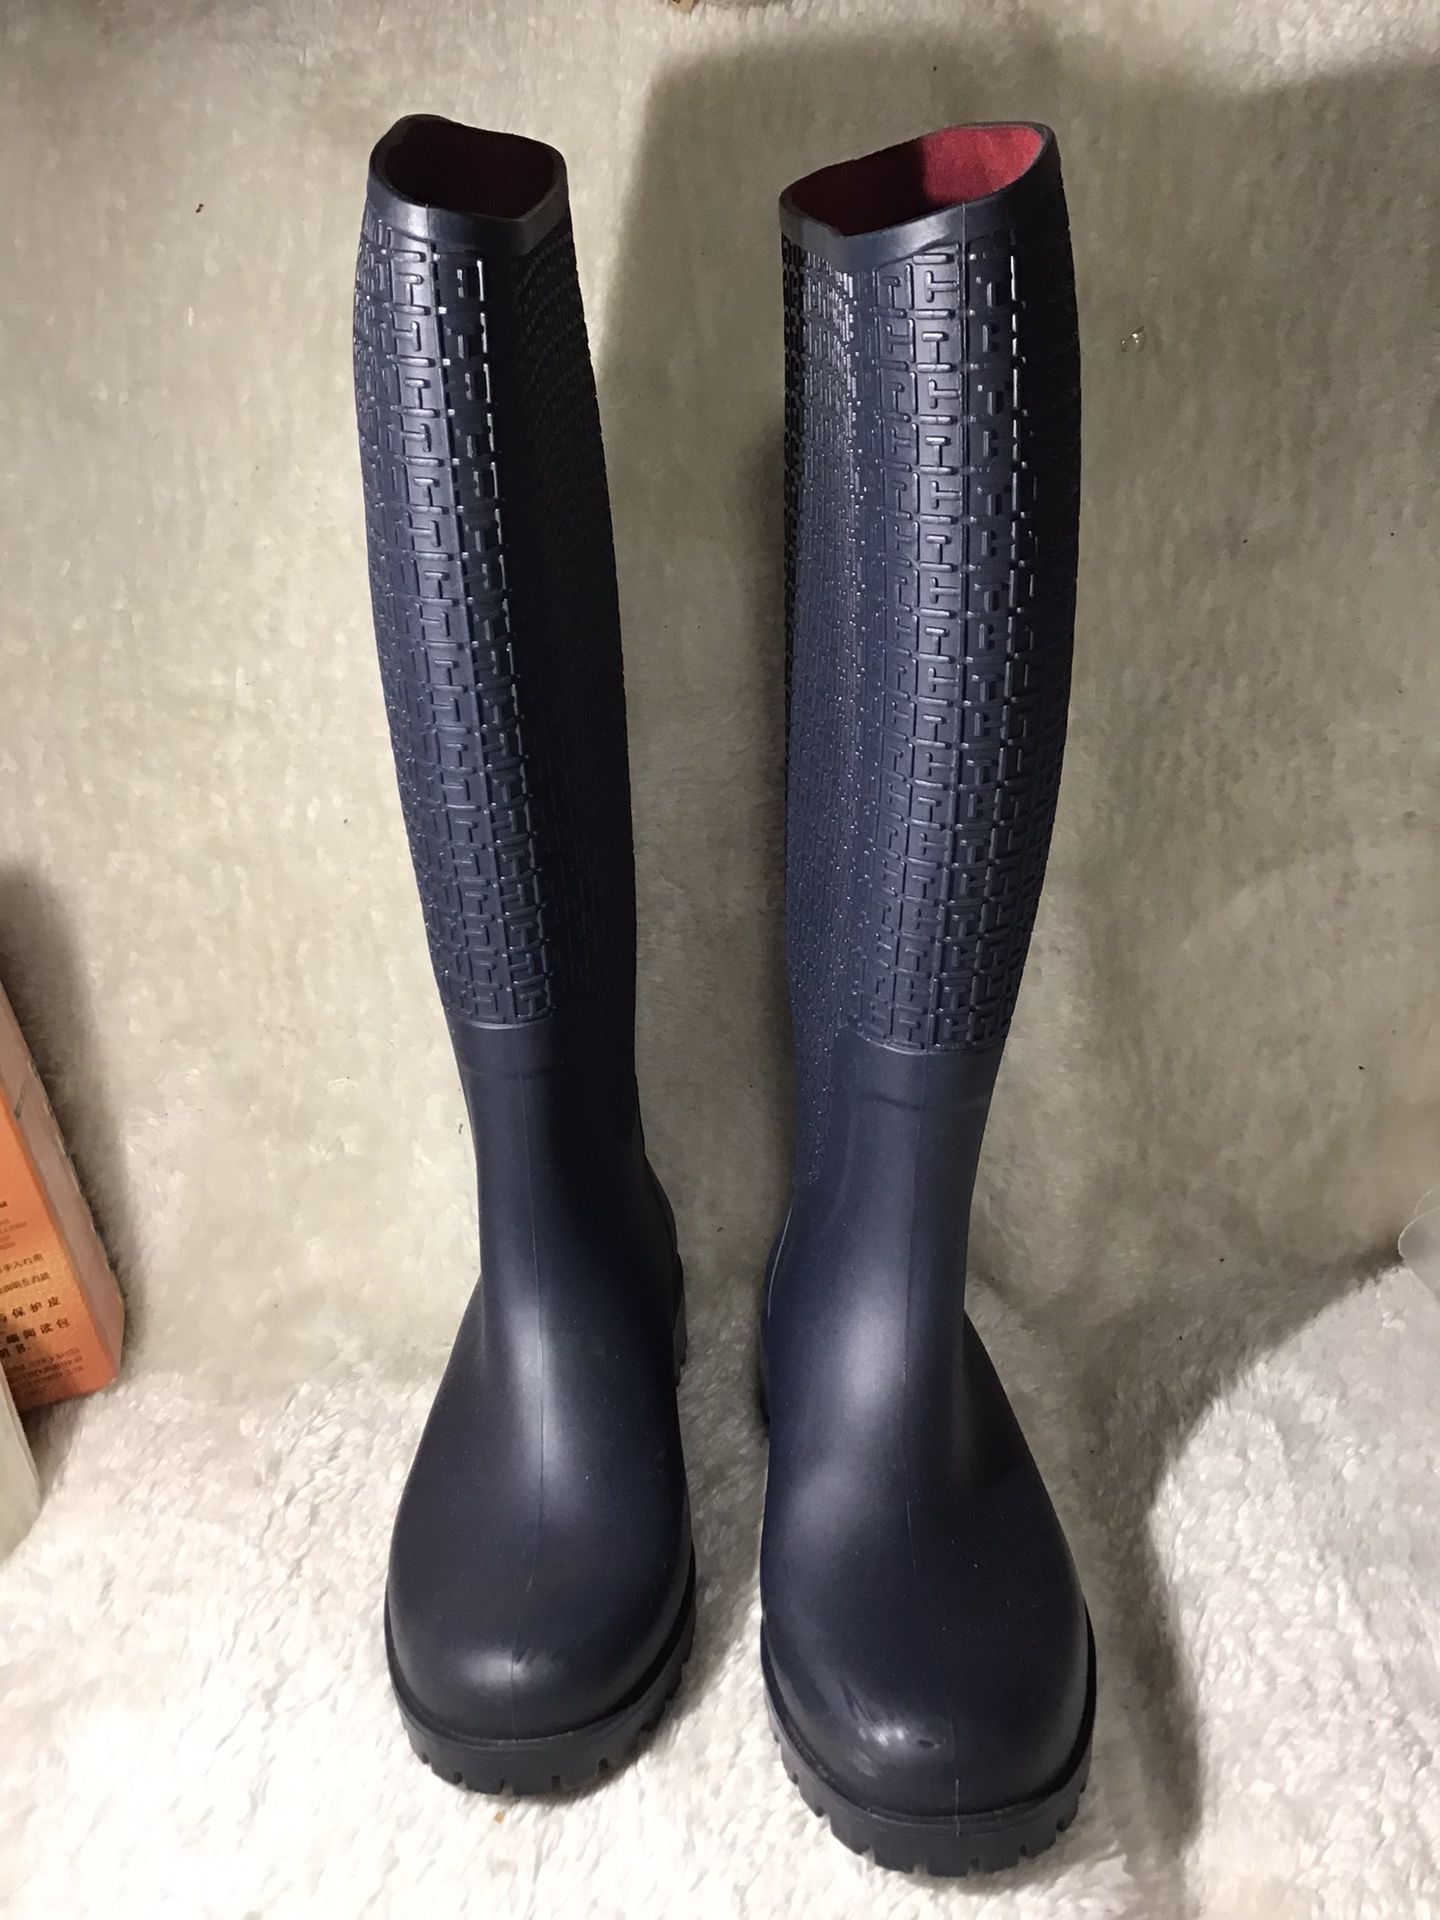 TOMMY HILFIGER TALL RUBBER MONOGRAM RAIN BOOTS SIZE 8 